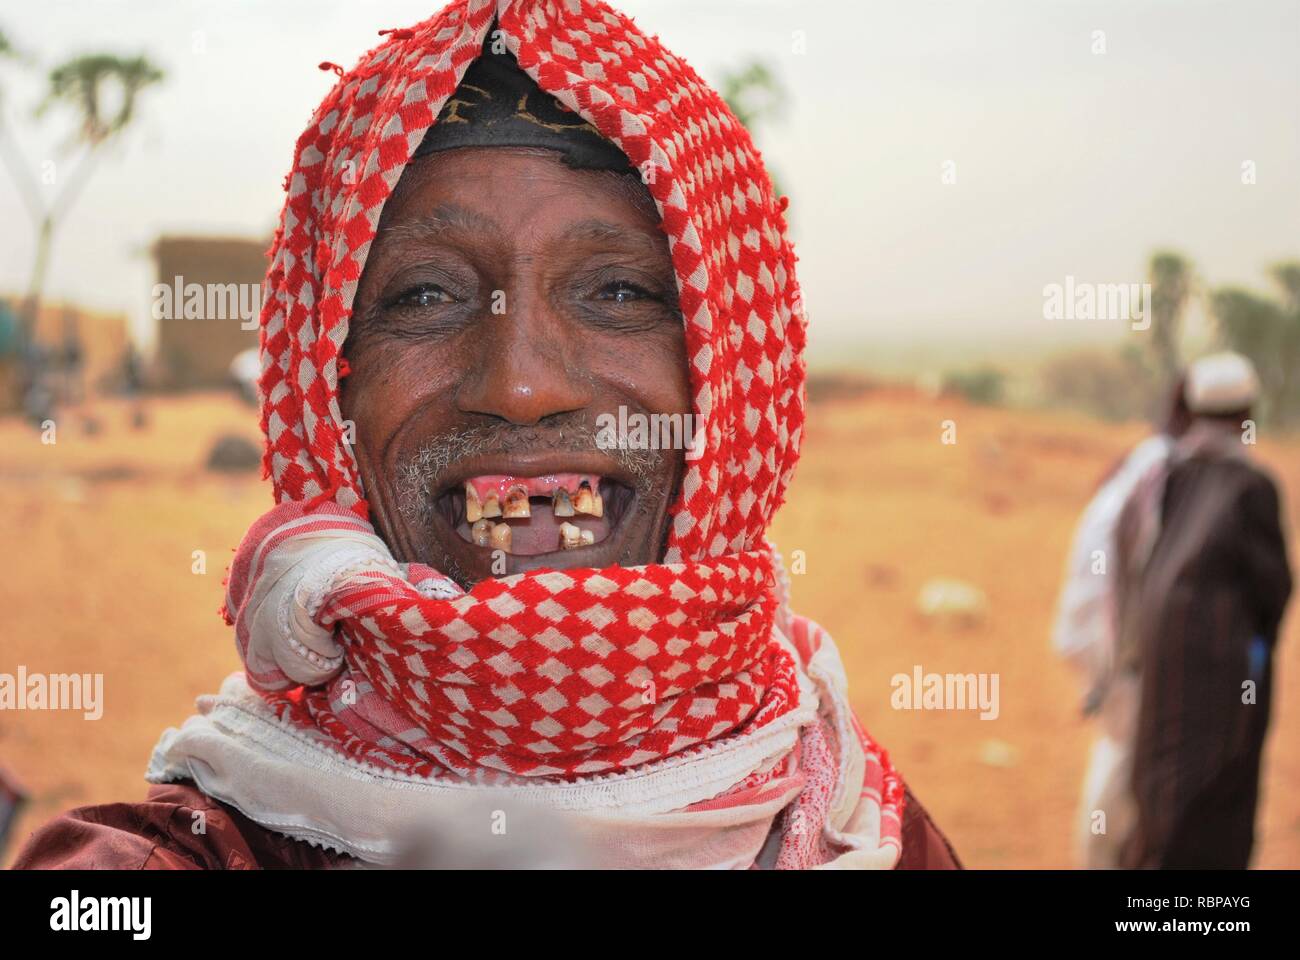 A smiling, old Fulani man with missing teeth happy to have visitors in his village in Niger, Africa Stock Photo